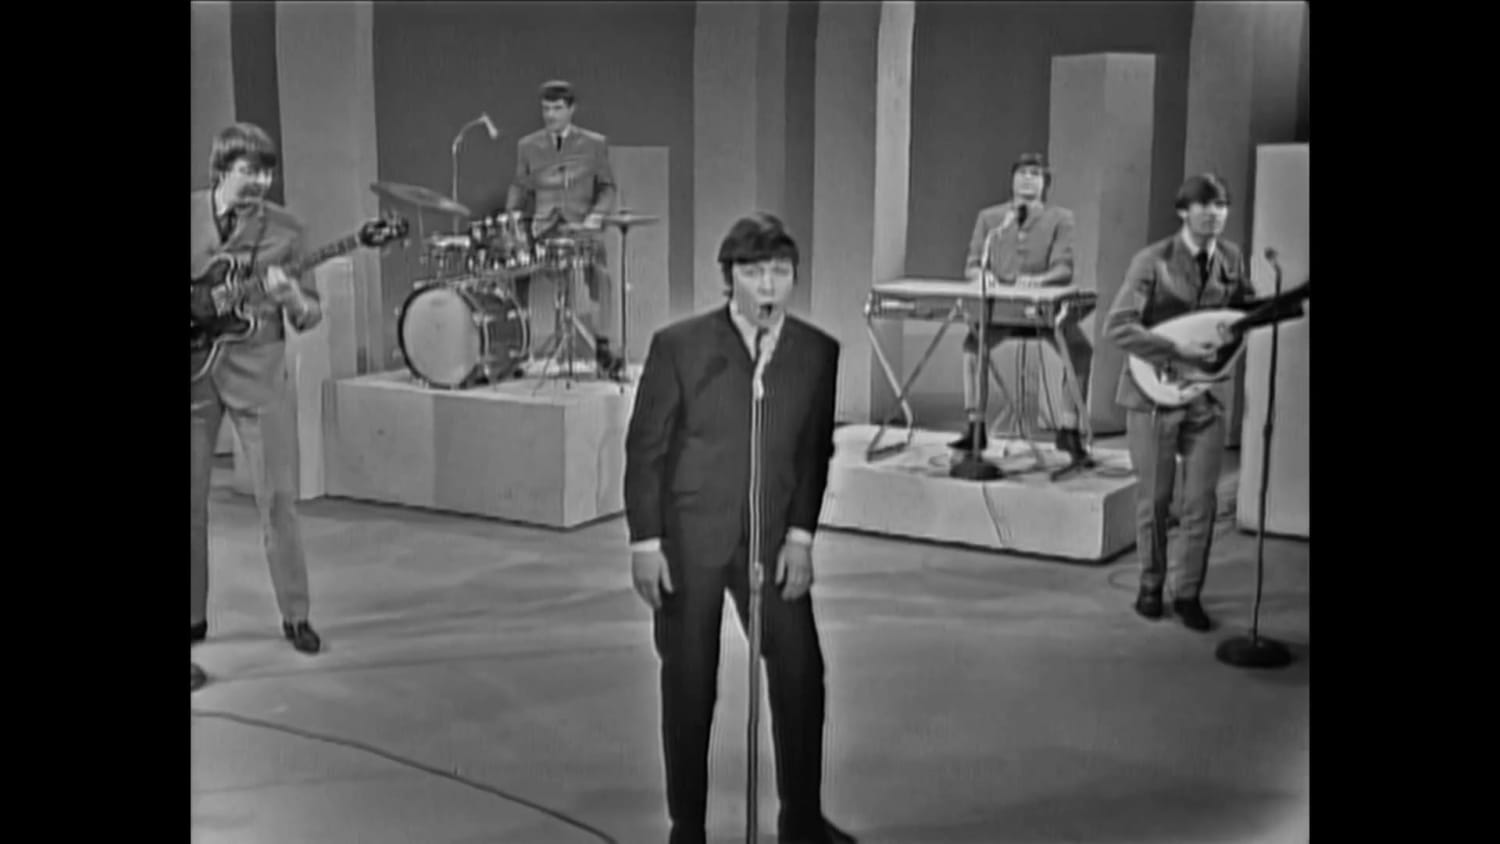 The Animals performing "Don't Let Me Be Misunderstood" on the Ed Sullivan Show on January 24, 1965